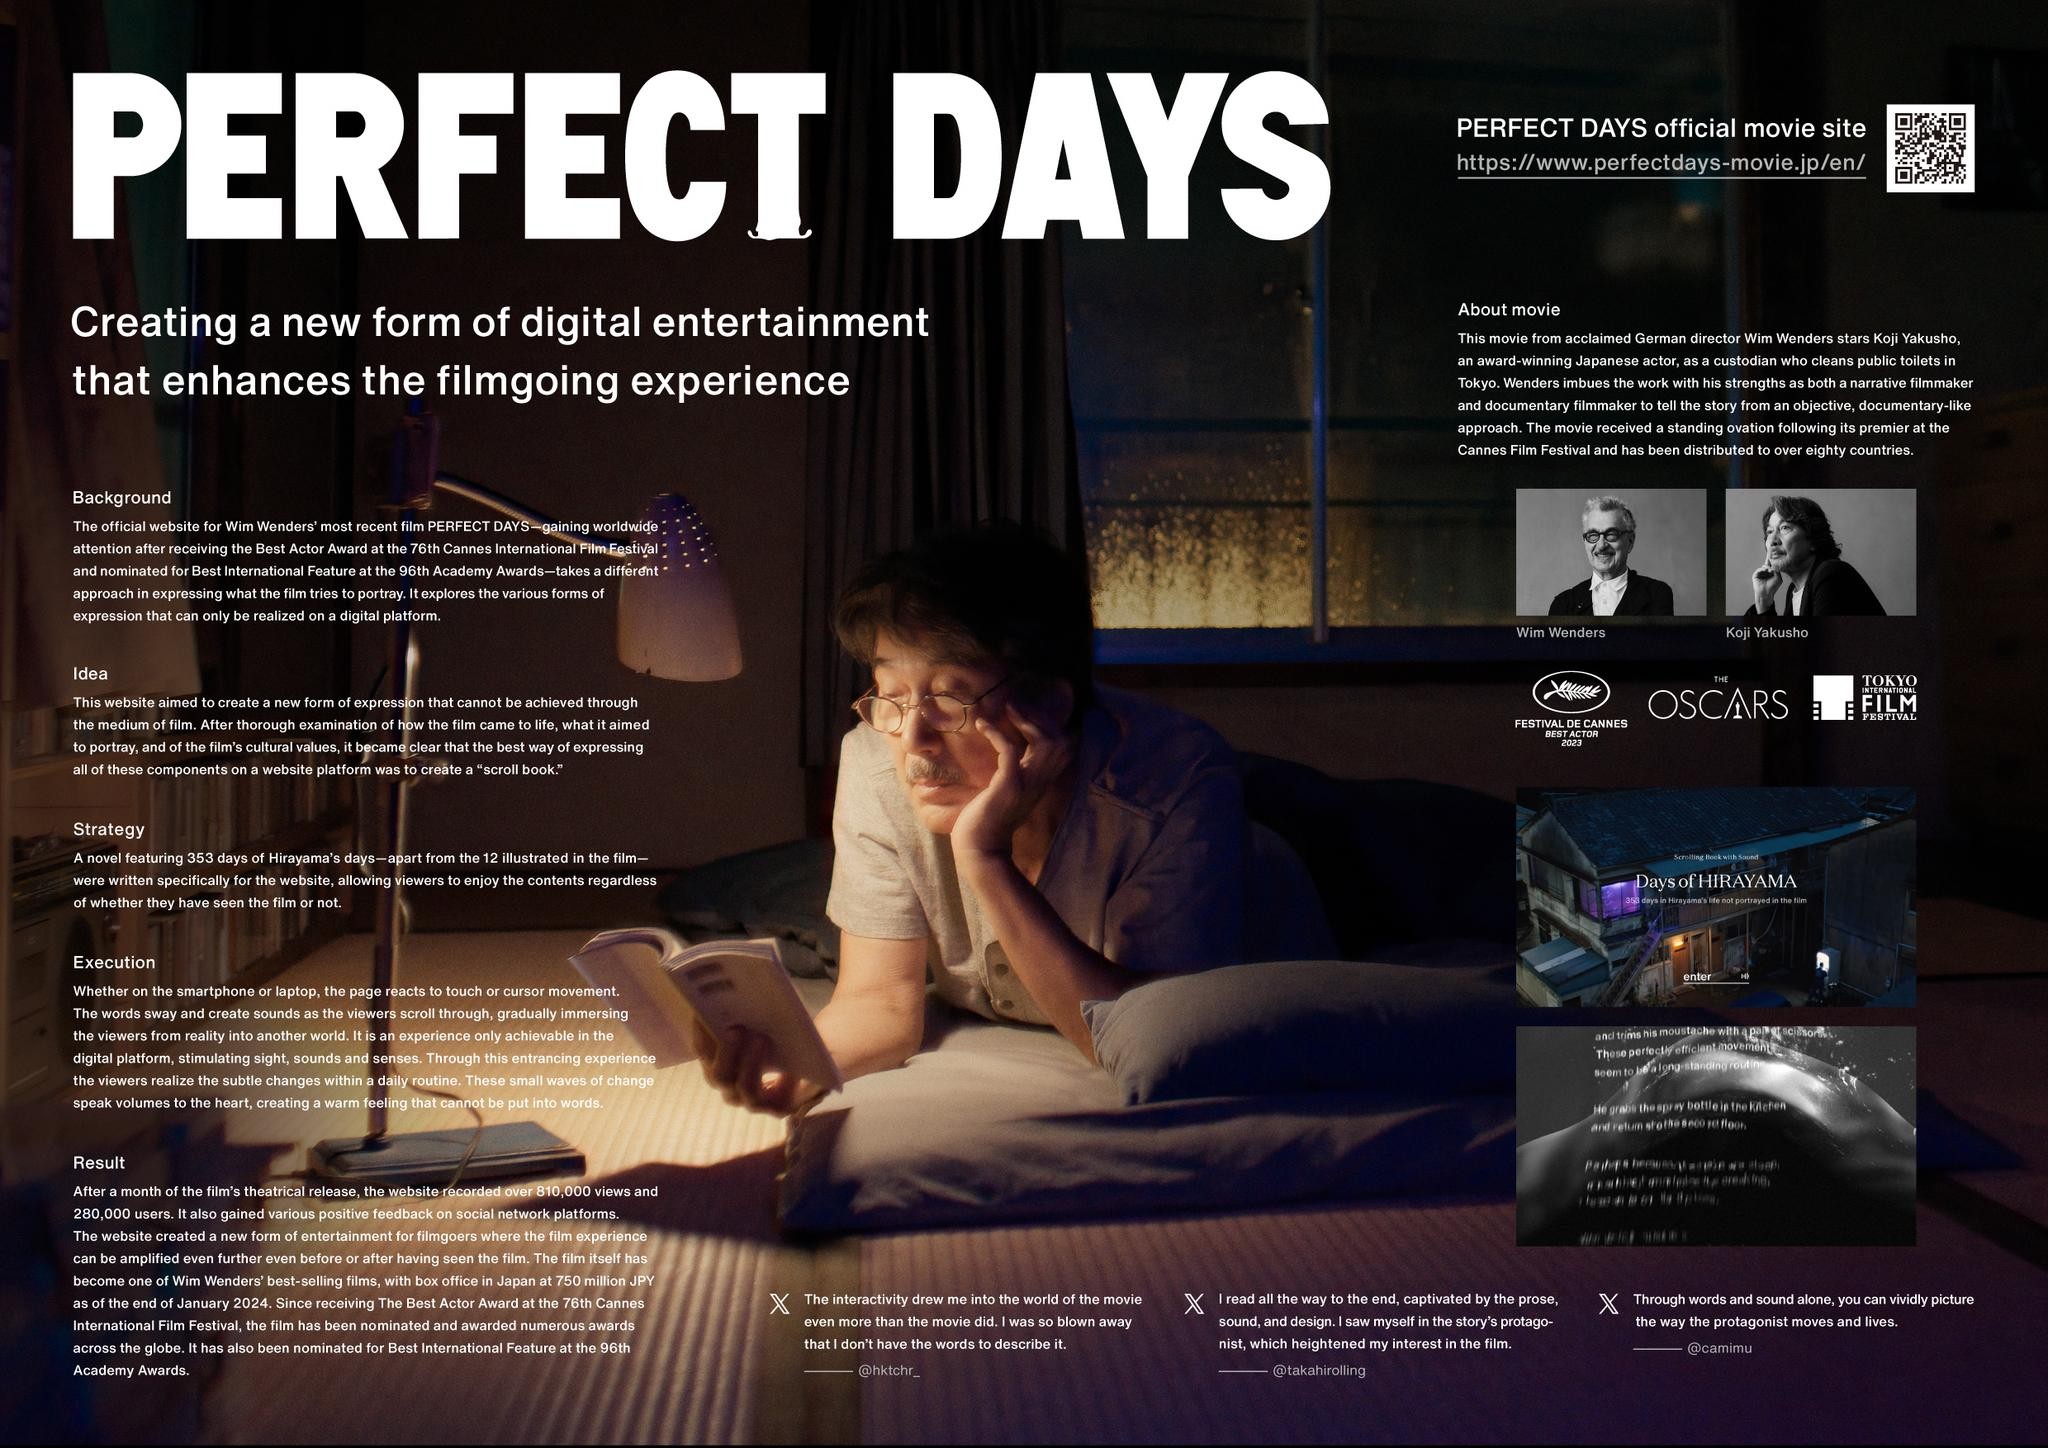 PERFECT DAYS OFFICIAL MOVIE SITE